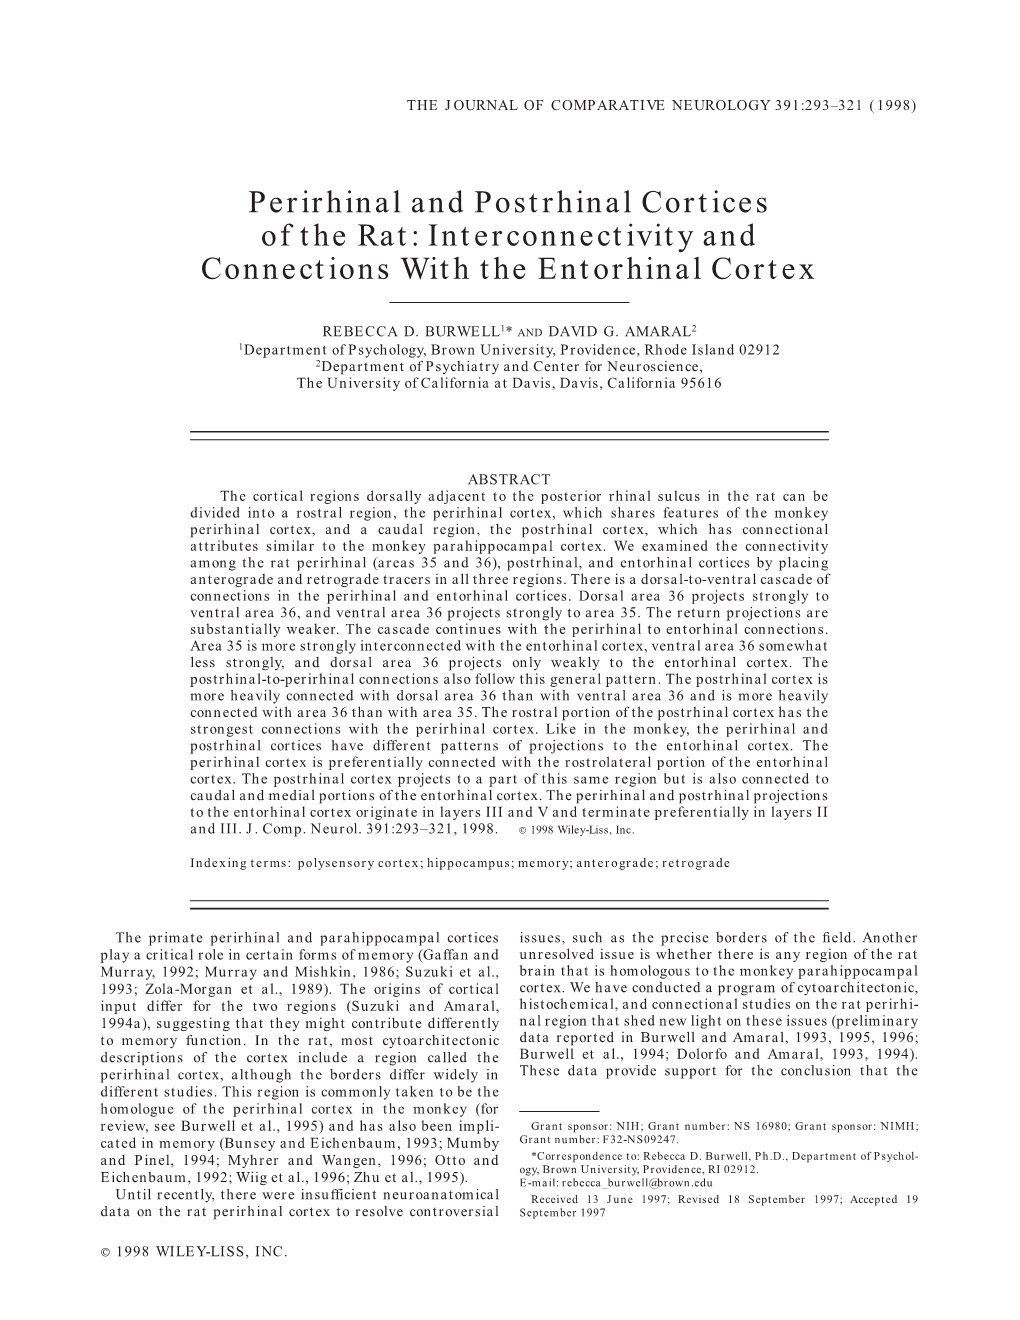 Perirhinal and Postrhinal Cortices of the Rat: Interconnectivity and Connections with the Entorhinal Cortex